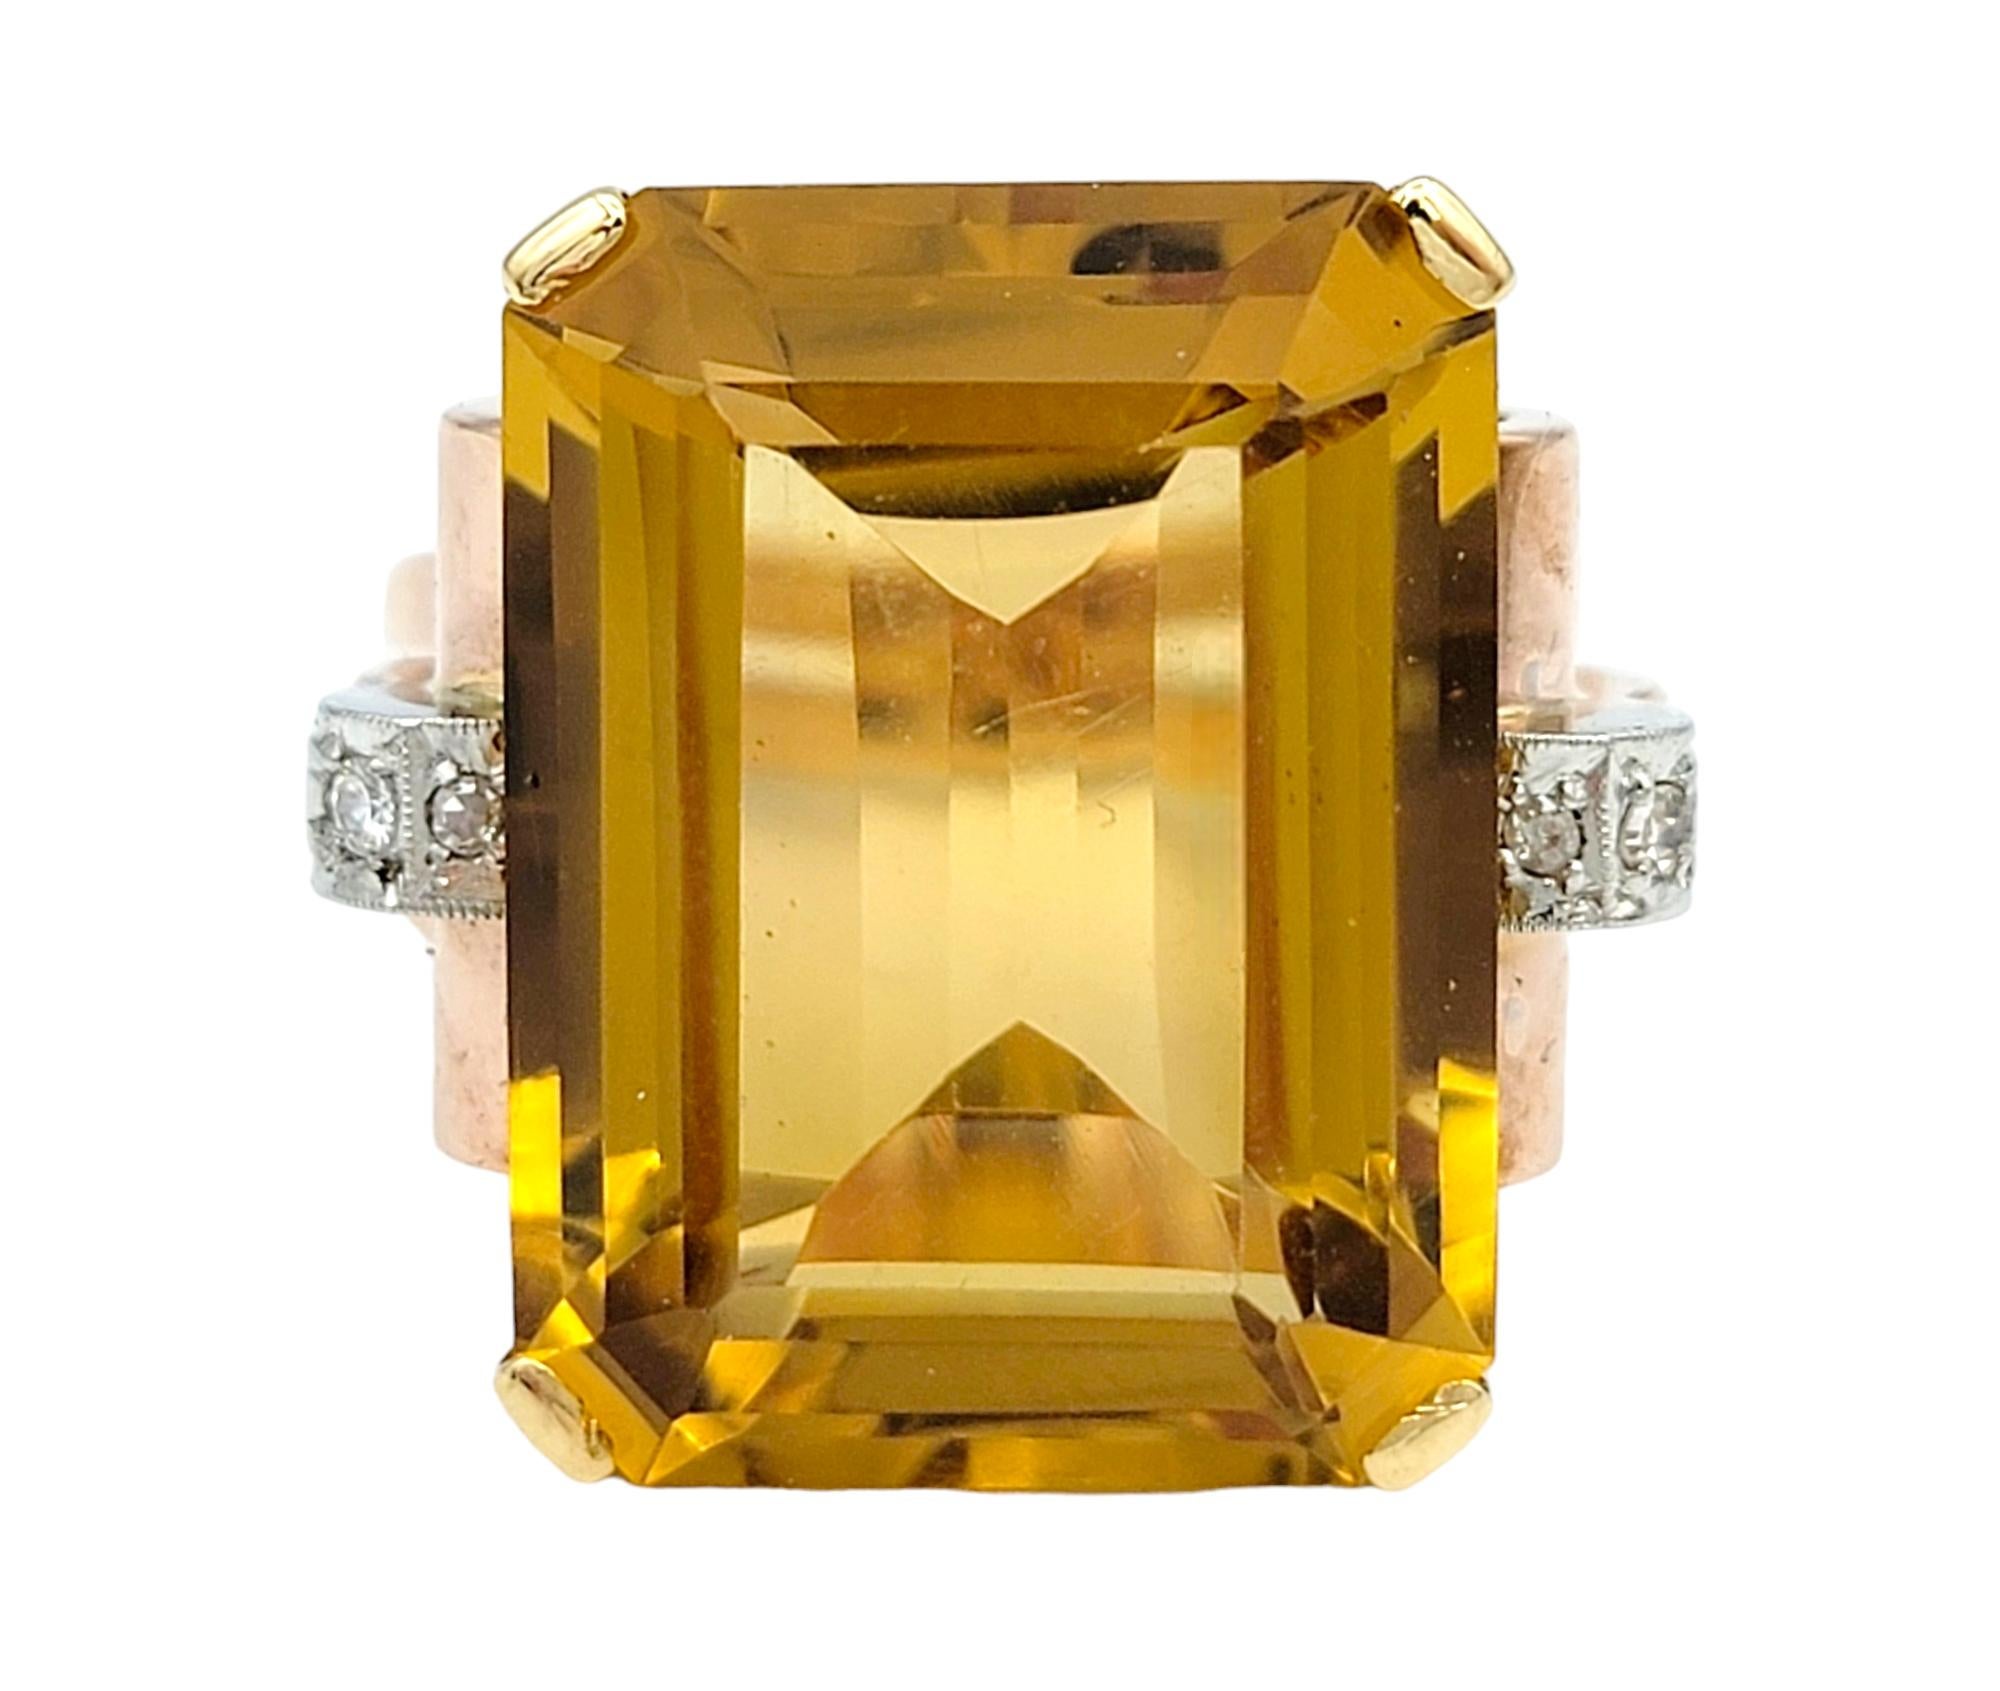 Ring Size: 7.5

This radiant citrine cocktail ring, set in 14 karat rose gold, is a show-stopping piece, combining luxury and elegance in a design that is both bold and sophisticated. The centerpiece of the ring is a remarkable 18.25 carat